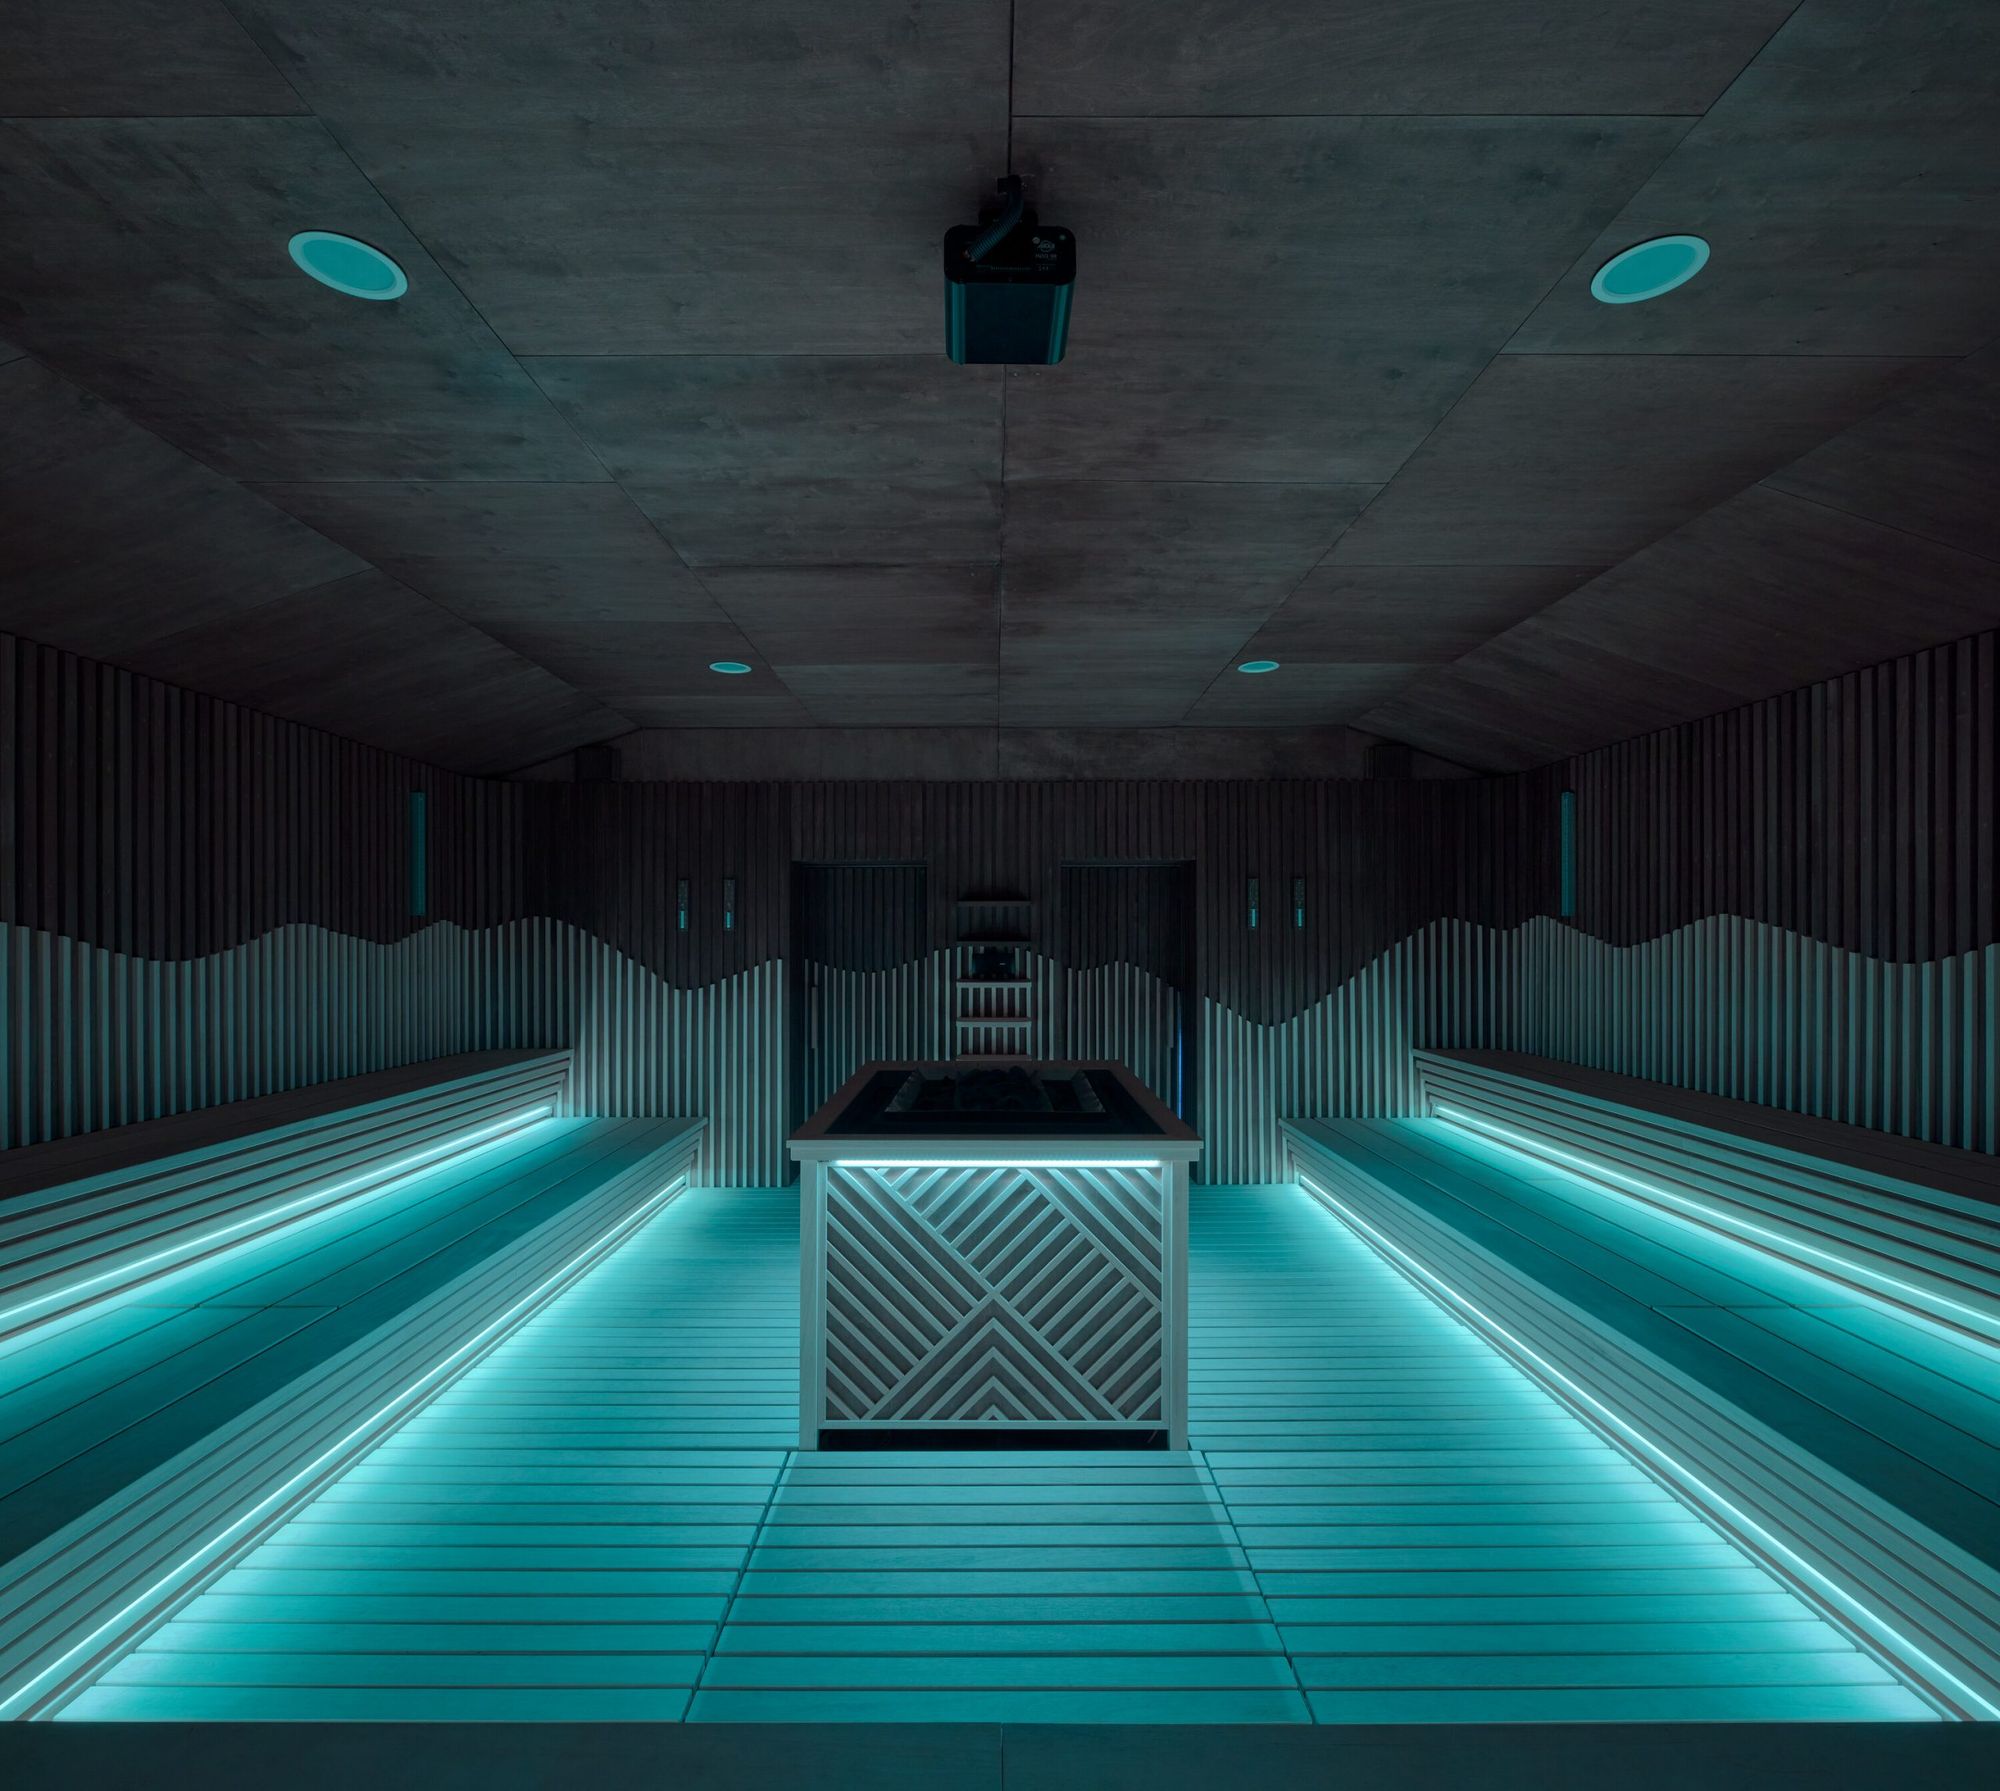 The new Infinit wellness offers a transcendent experience | Studio Reaktor